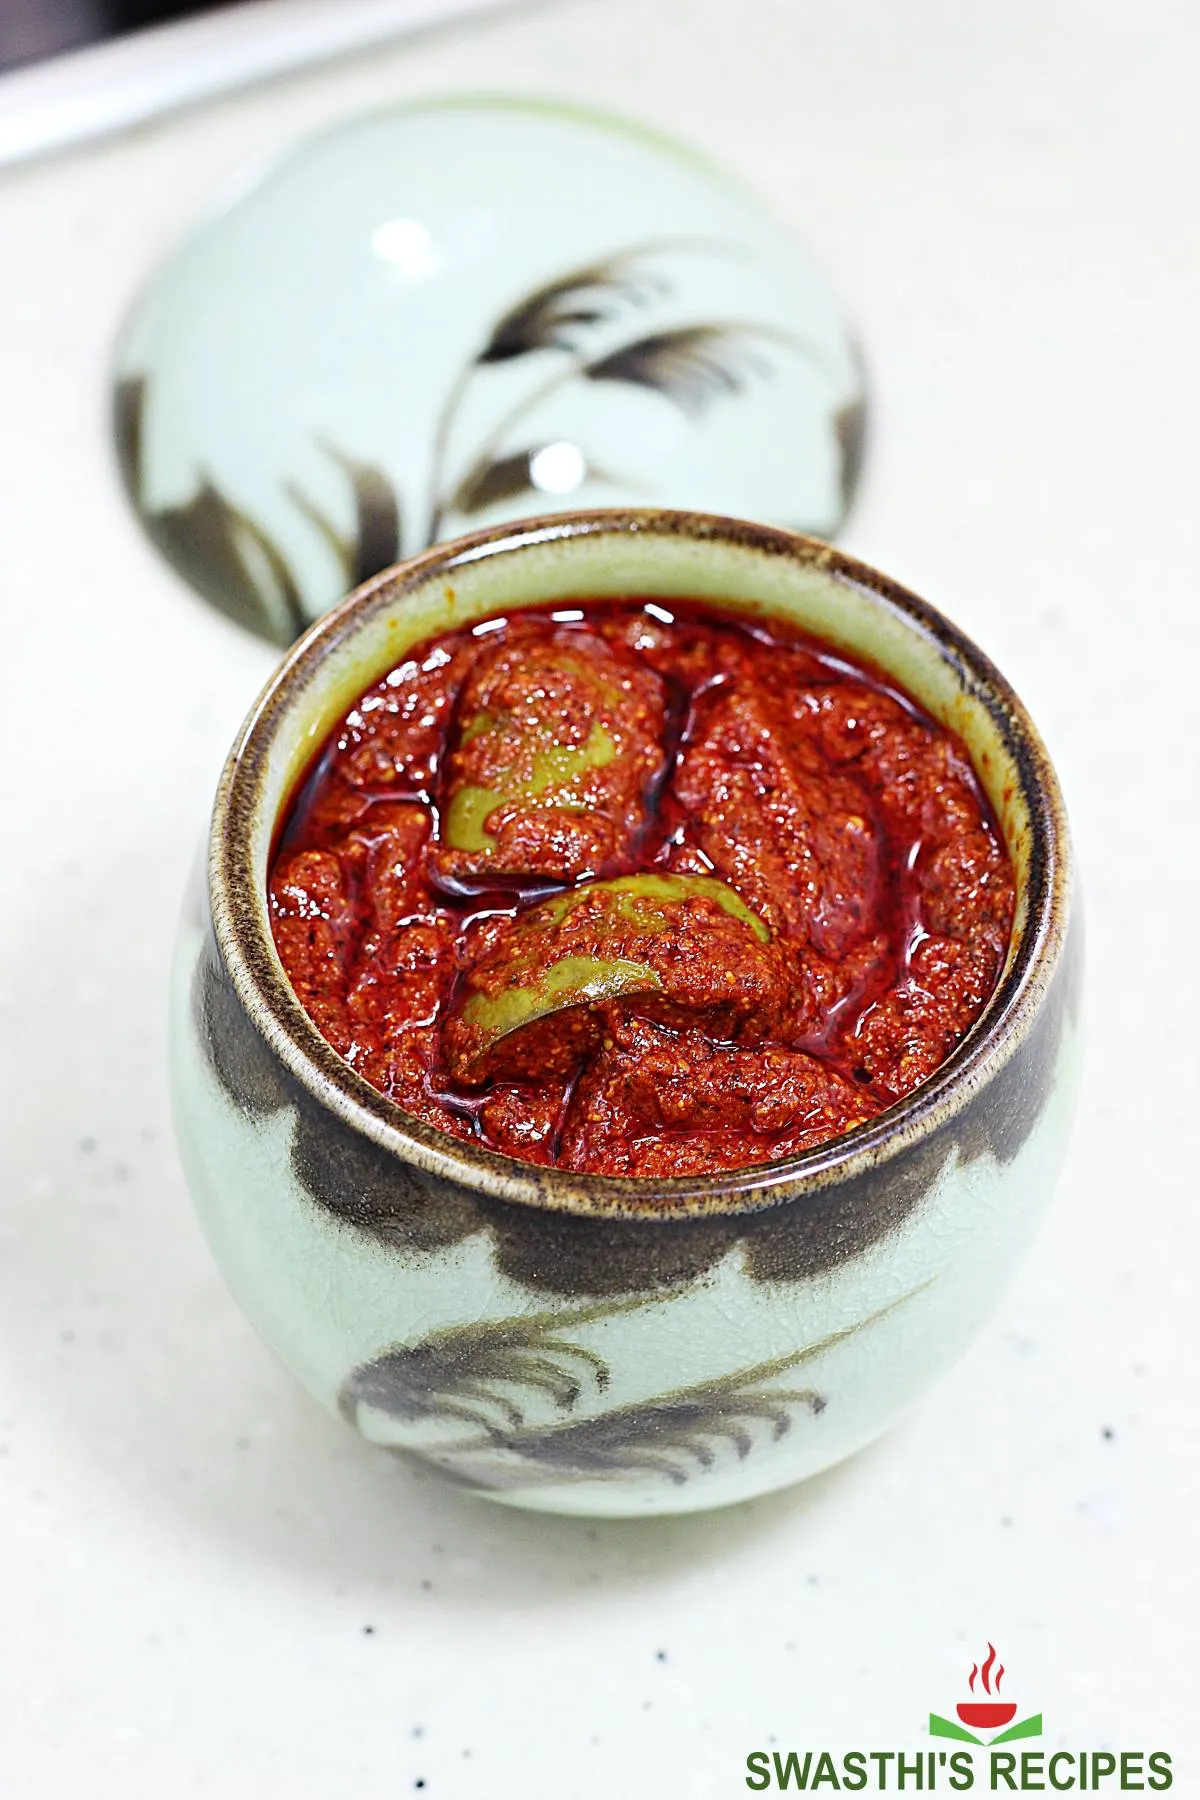 mango pickle recipe made with unripe raw green mangoes